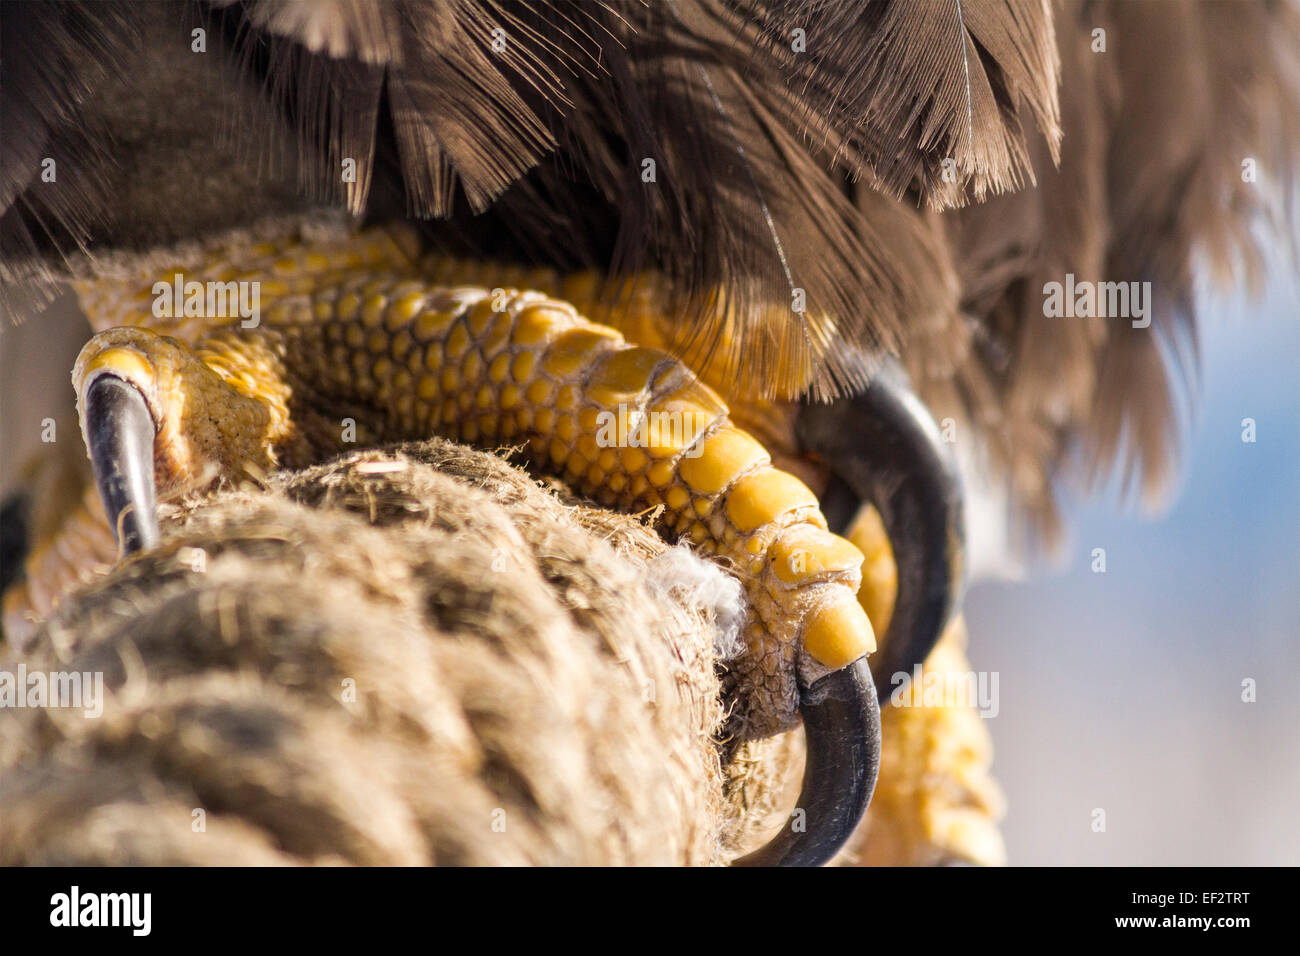 Talons of a North American Bald Eagle tethered to a stand at a falconry demonstration Stock Photo